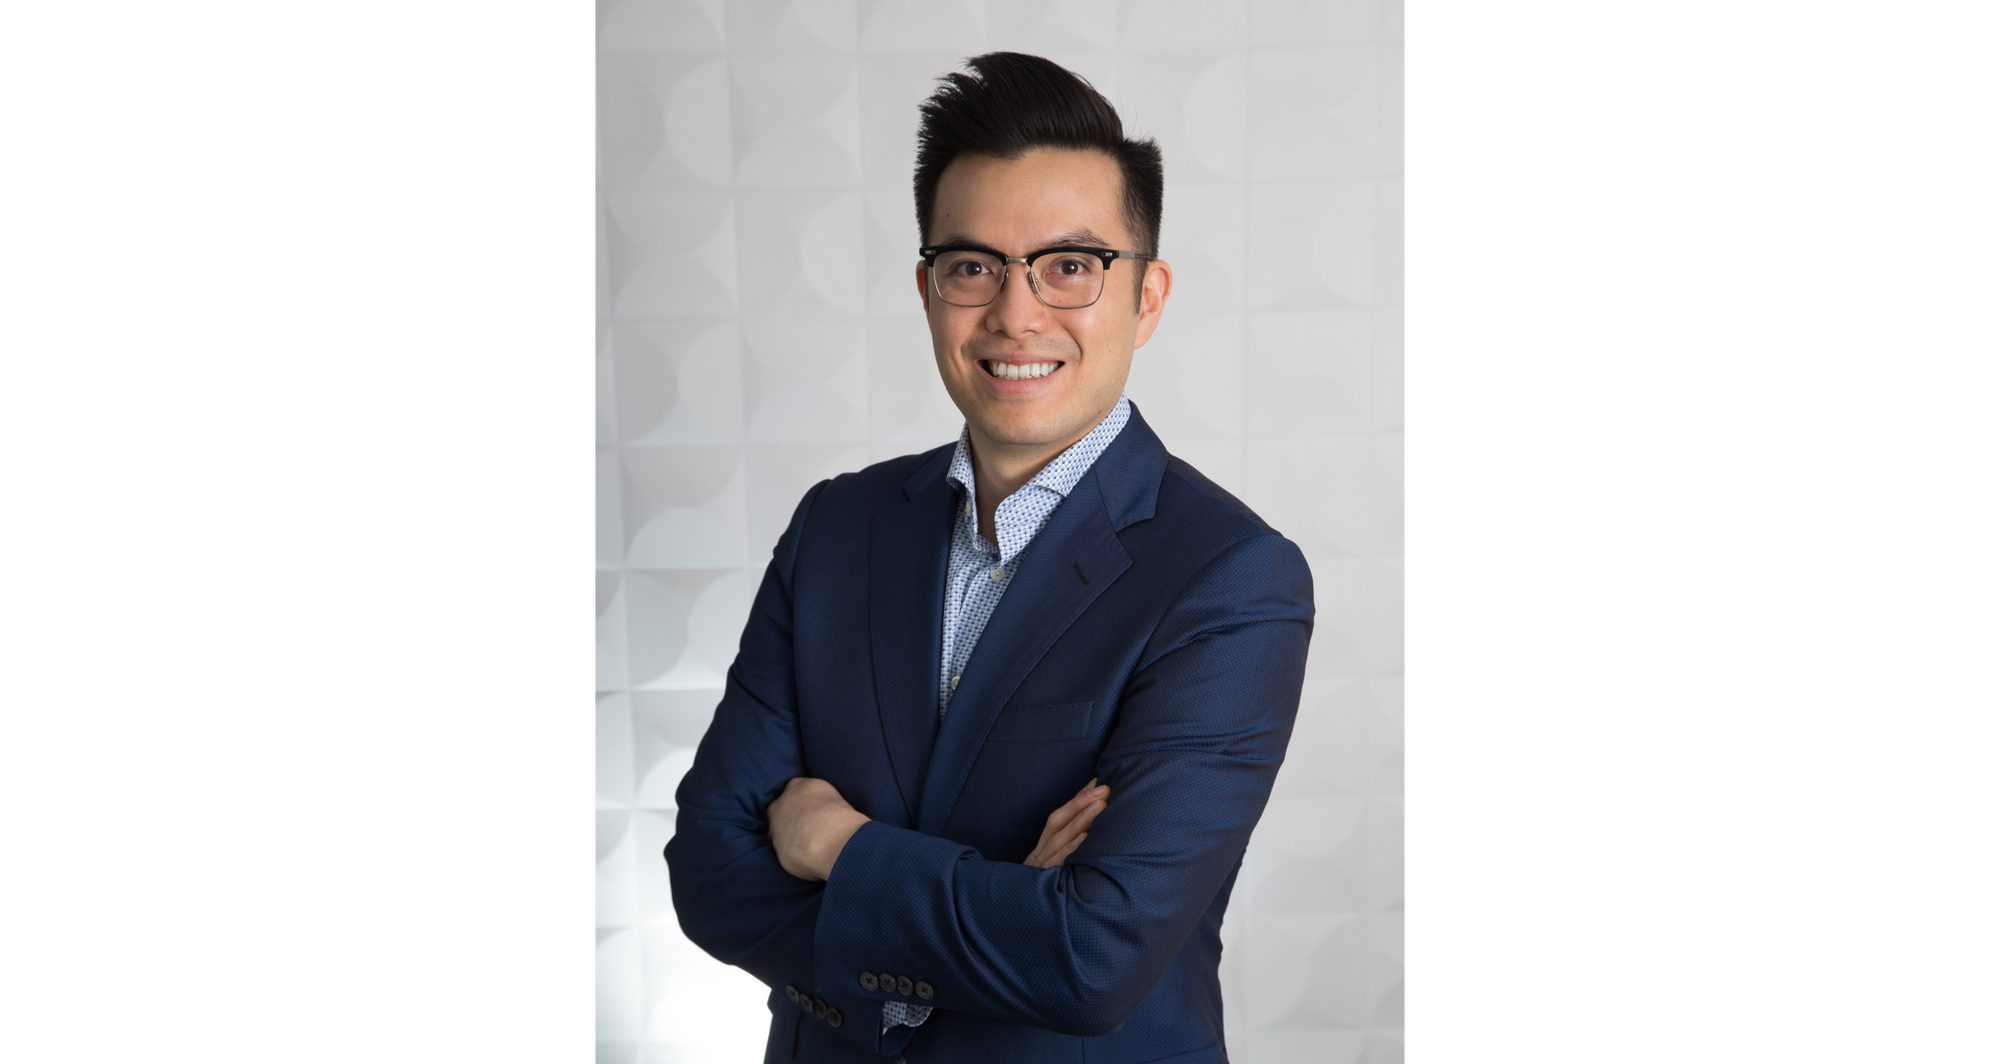 Empowering Canadians to Achieve Financial Goals - Jim Pan